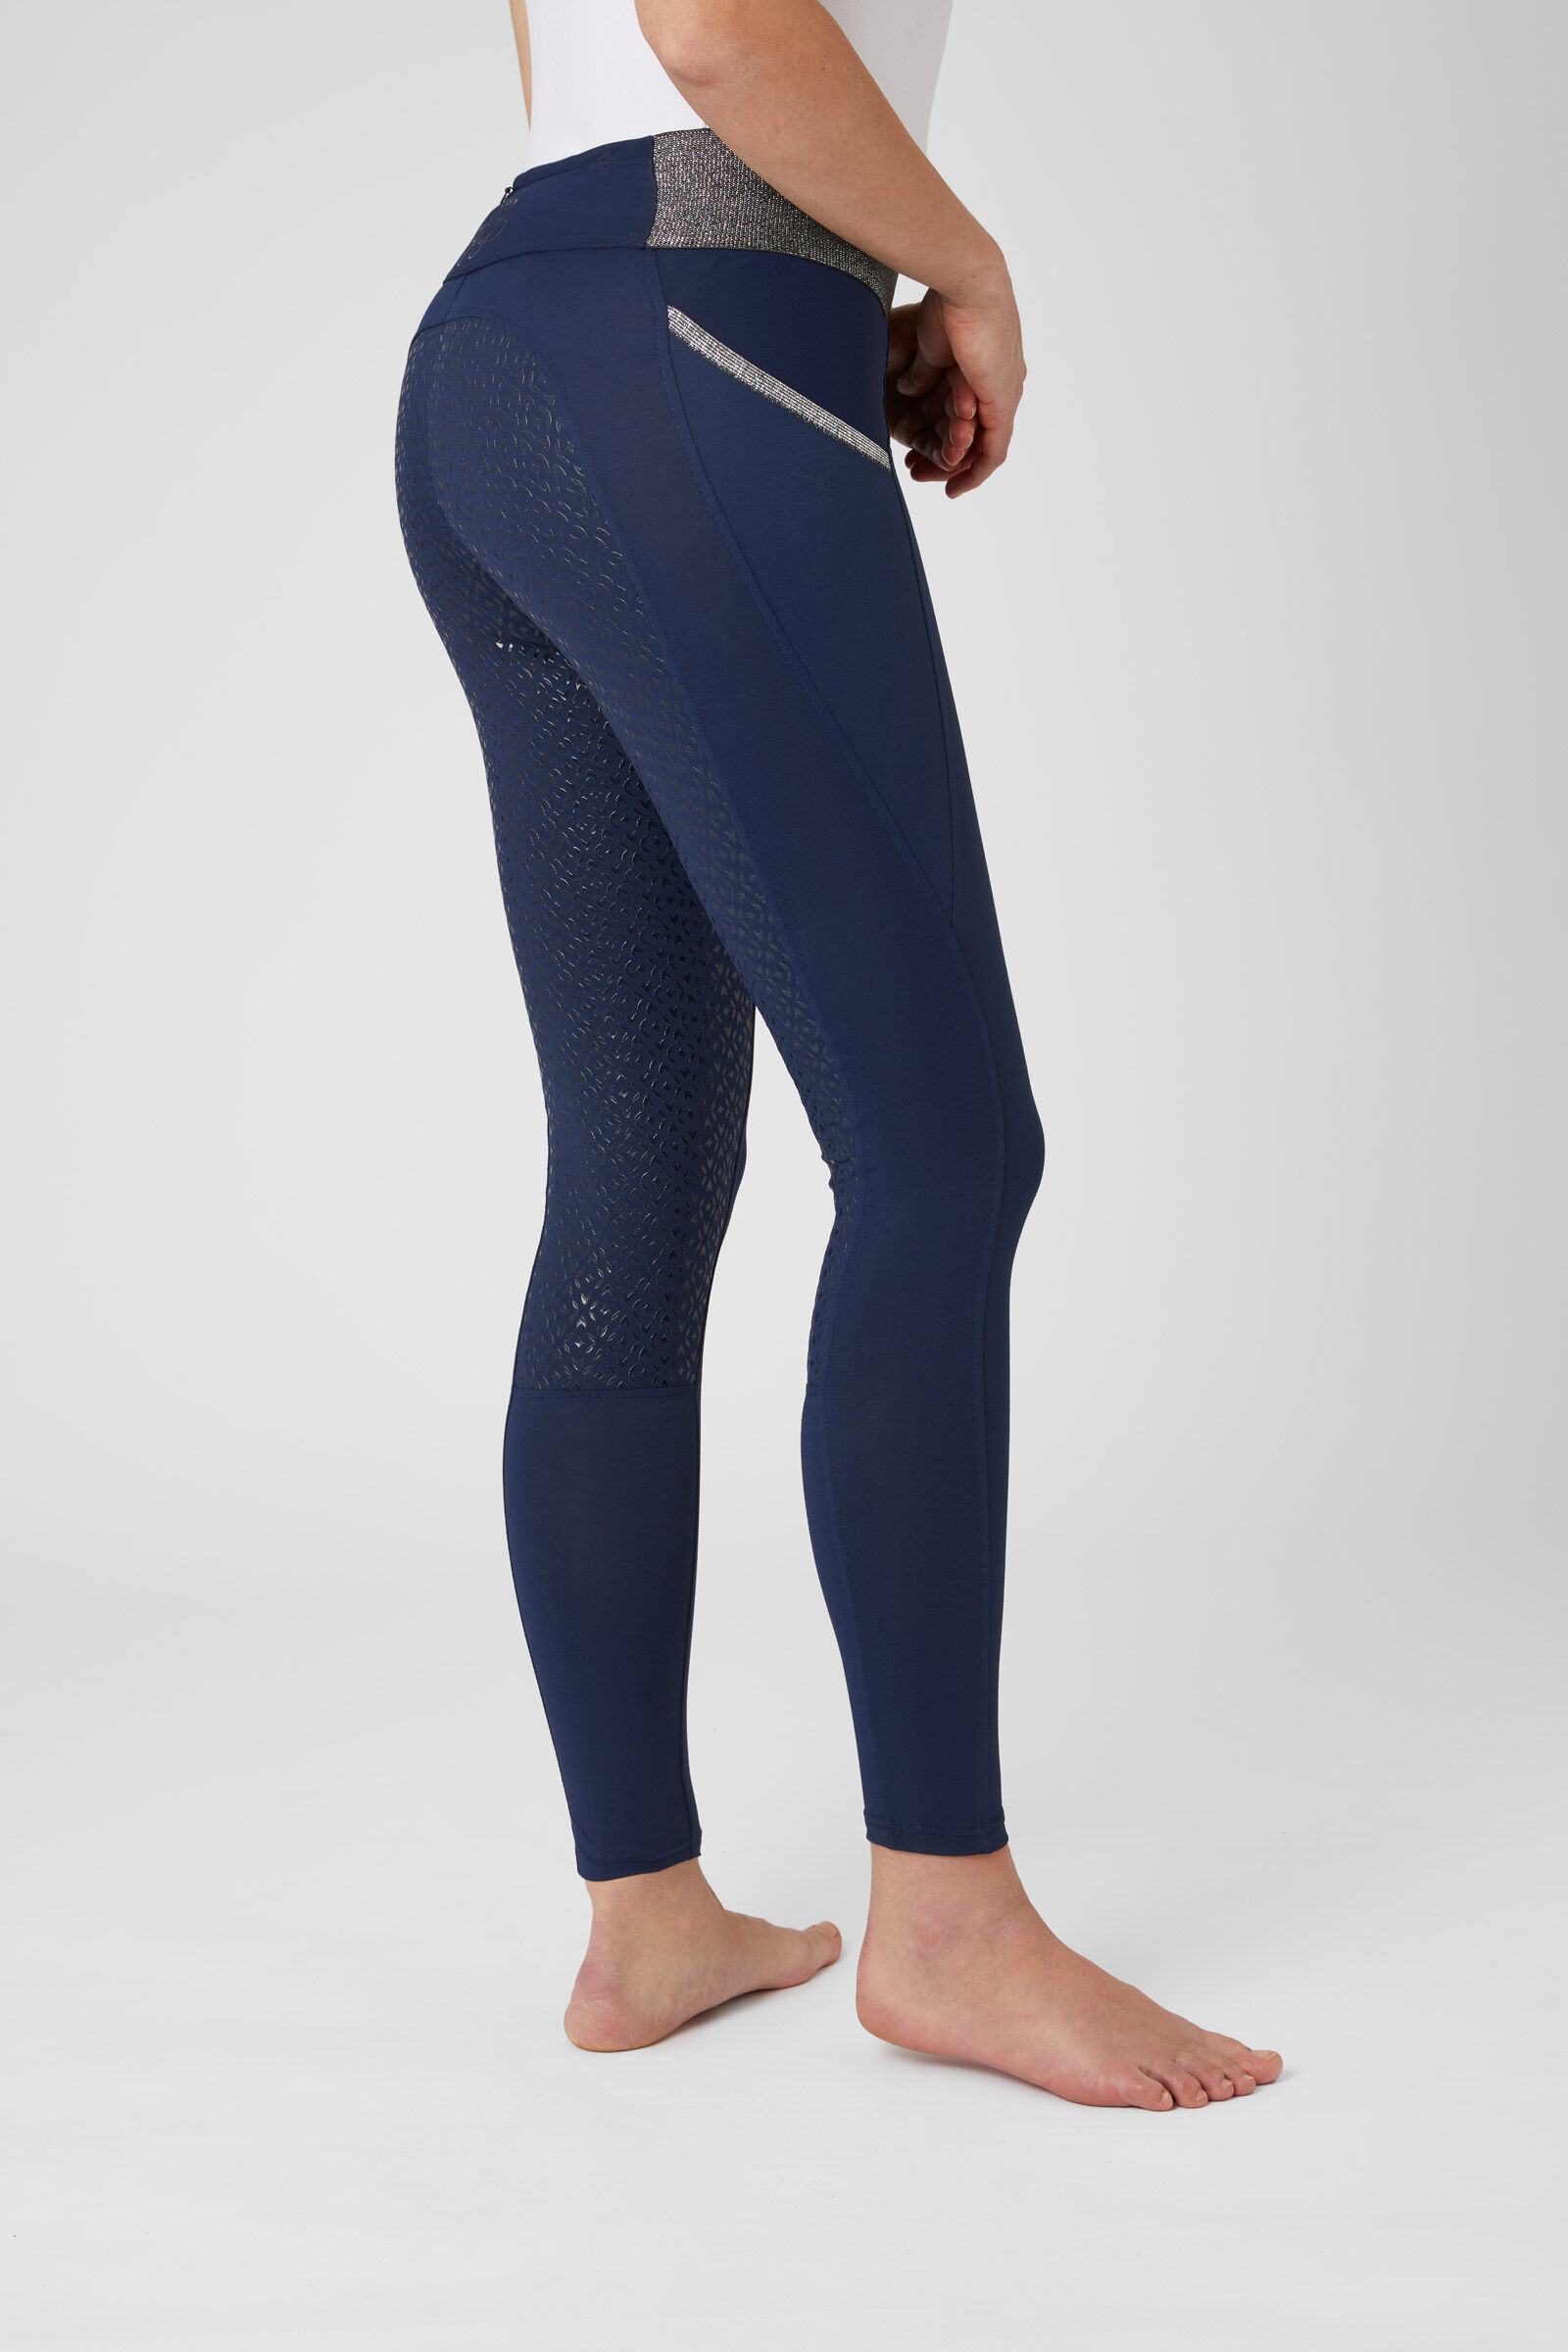 Full Seat Riding Tights for Women with Glitter Waist | horze.co.uk